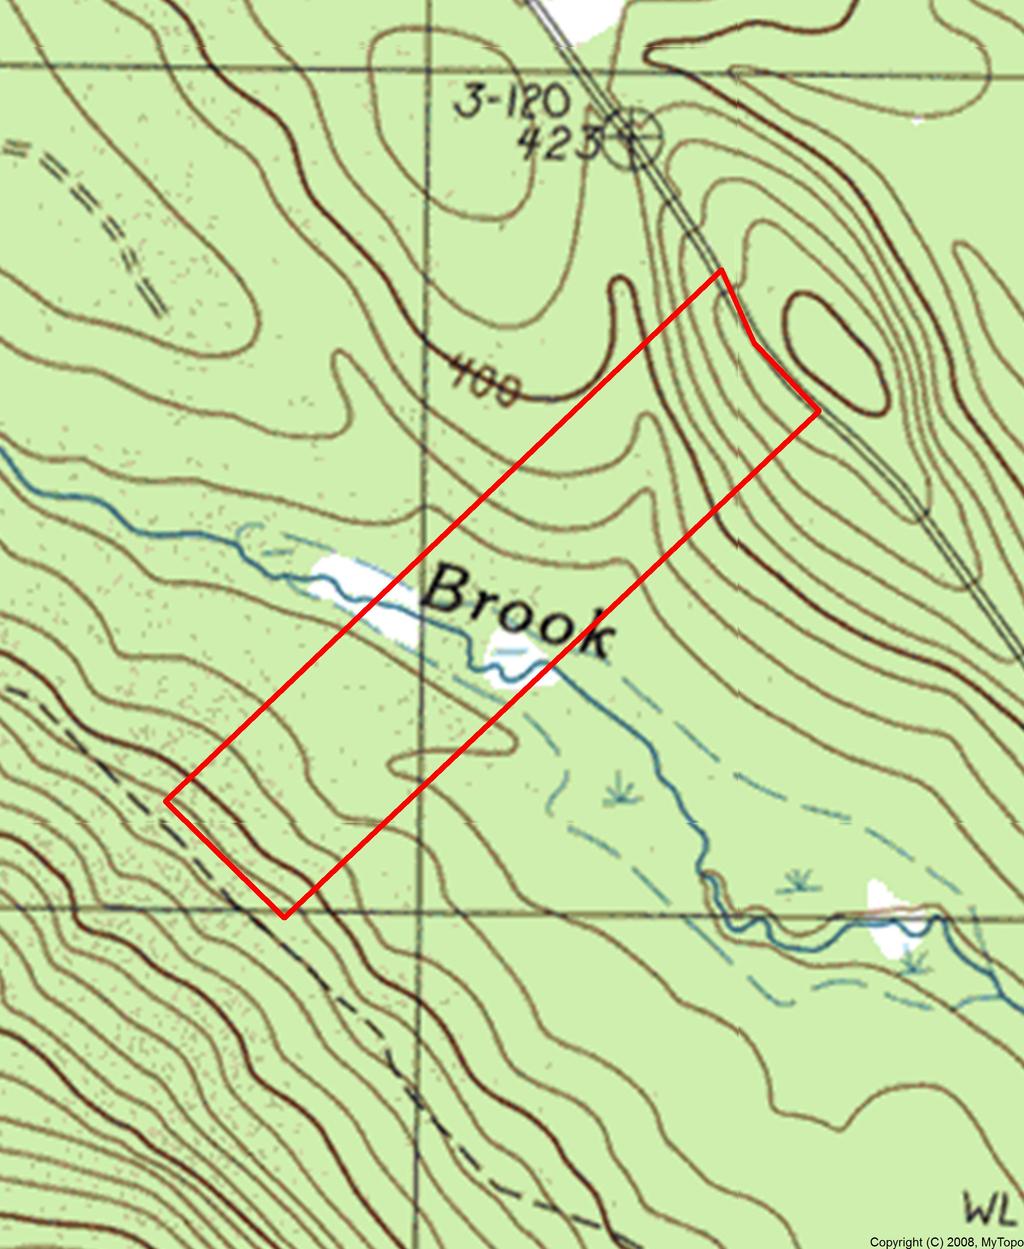 Declination MN SCALE 1:6000 0.0 0.1 0.2 MILES 0 100 200 300 YARDS MN 17.09 W Name: Dill Brook Forest Scale: 1 inch = 500 ft.